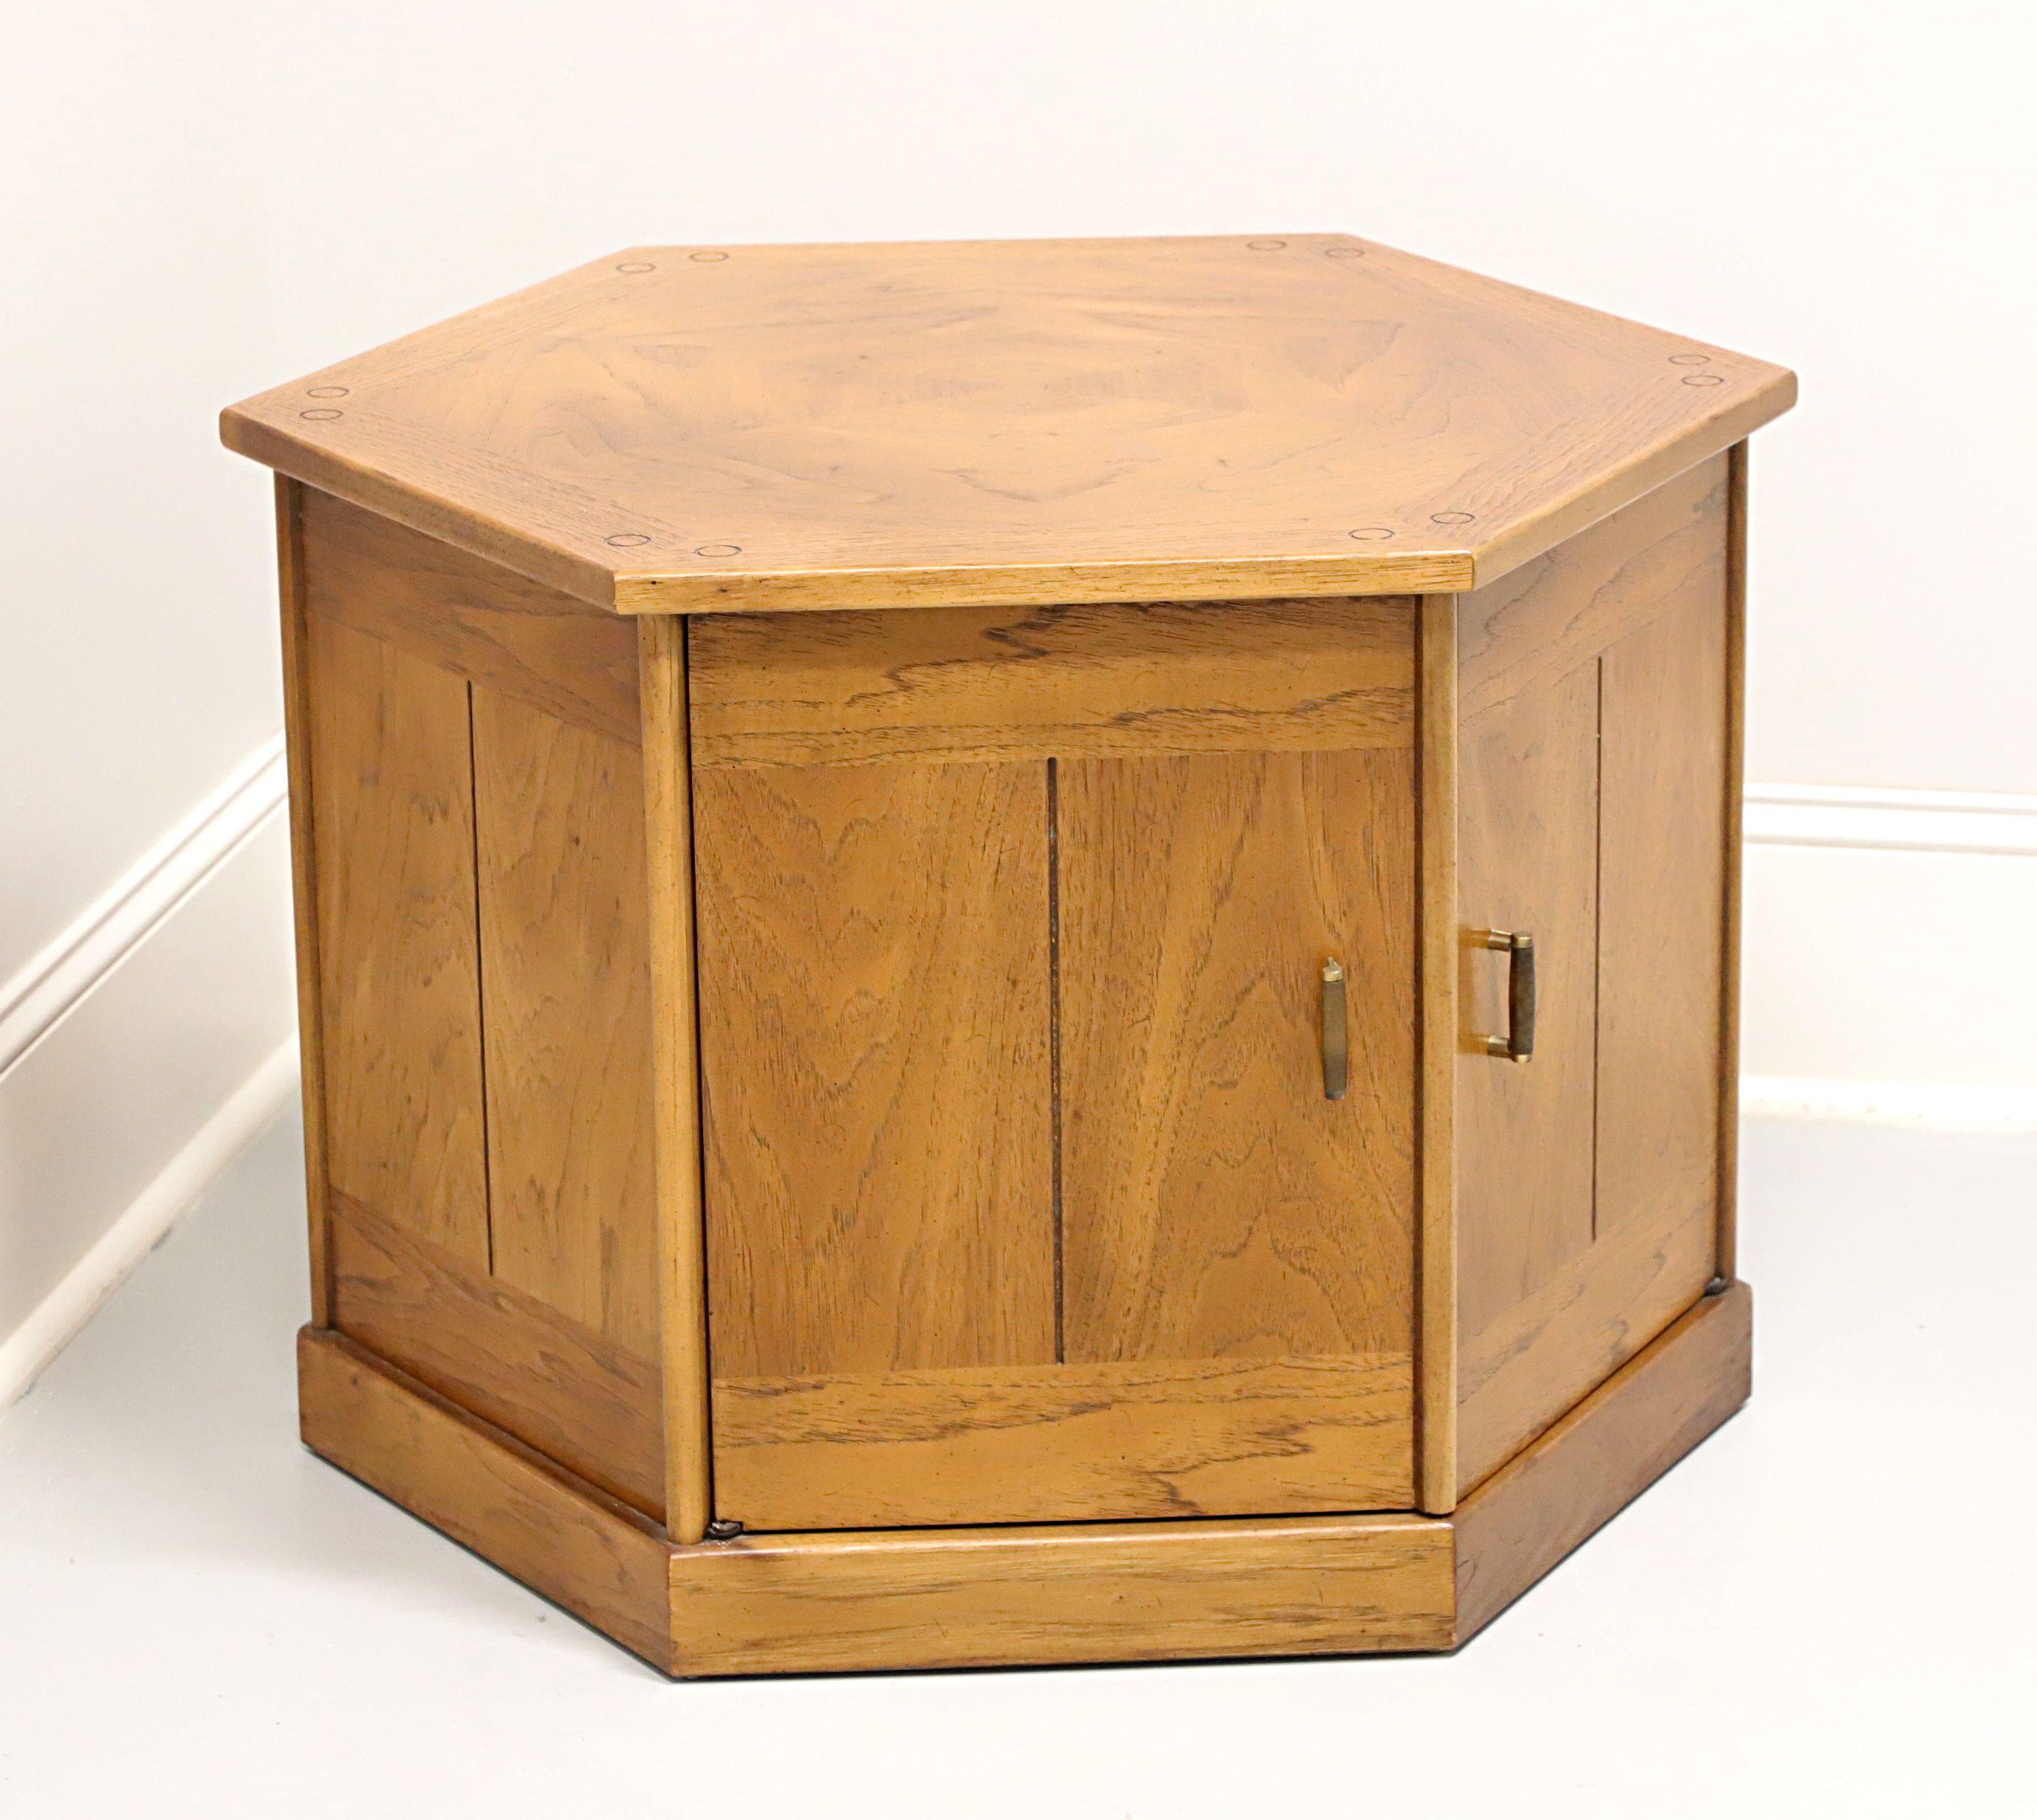 A Mid 20th Century style hexagonal shaped cabinet accent table by Drexel, from their Benchcraft Collection. Pecan with a slightly distressed finish, inlaid & banded top, and brass hardware. Features a two door cabinet revealing a storage area. Made